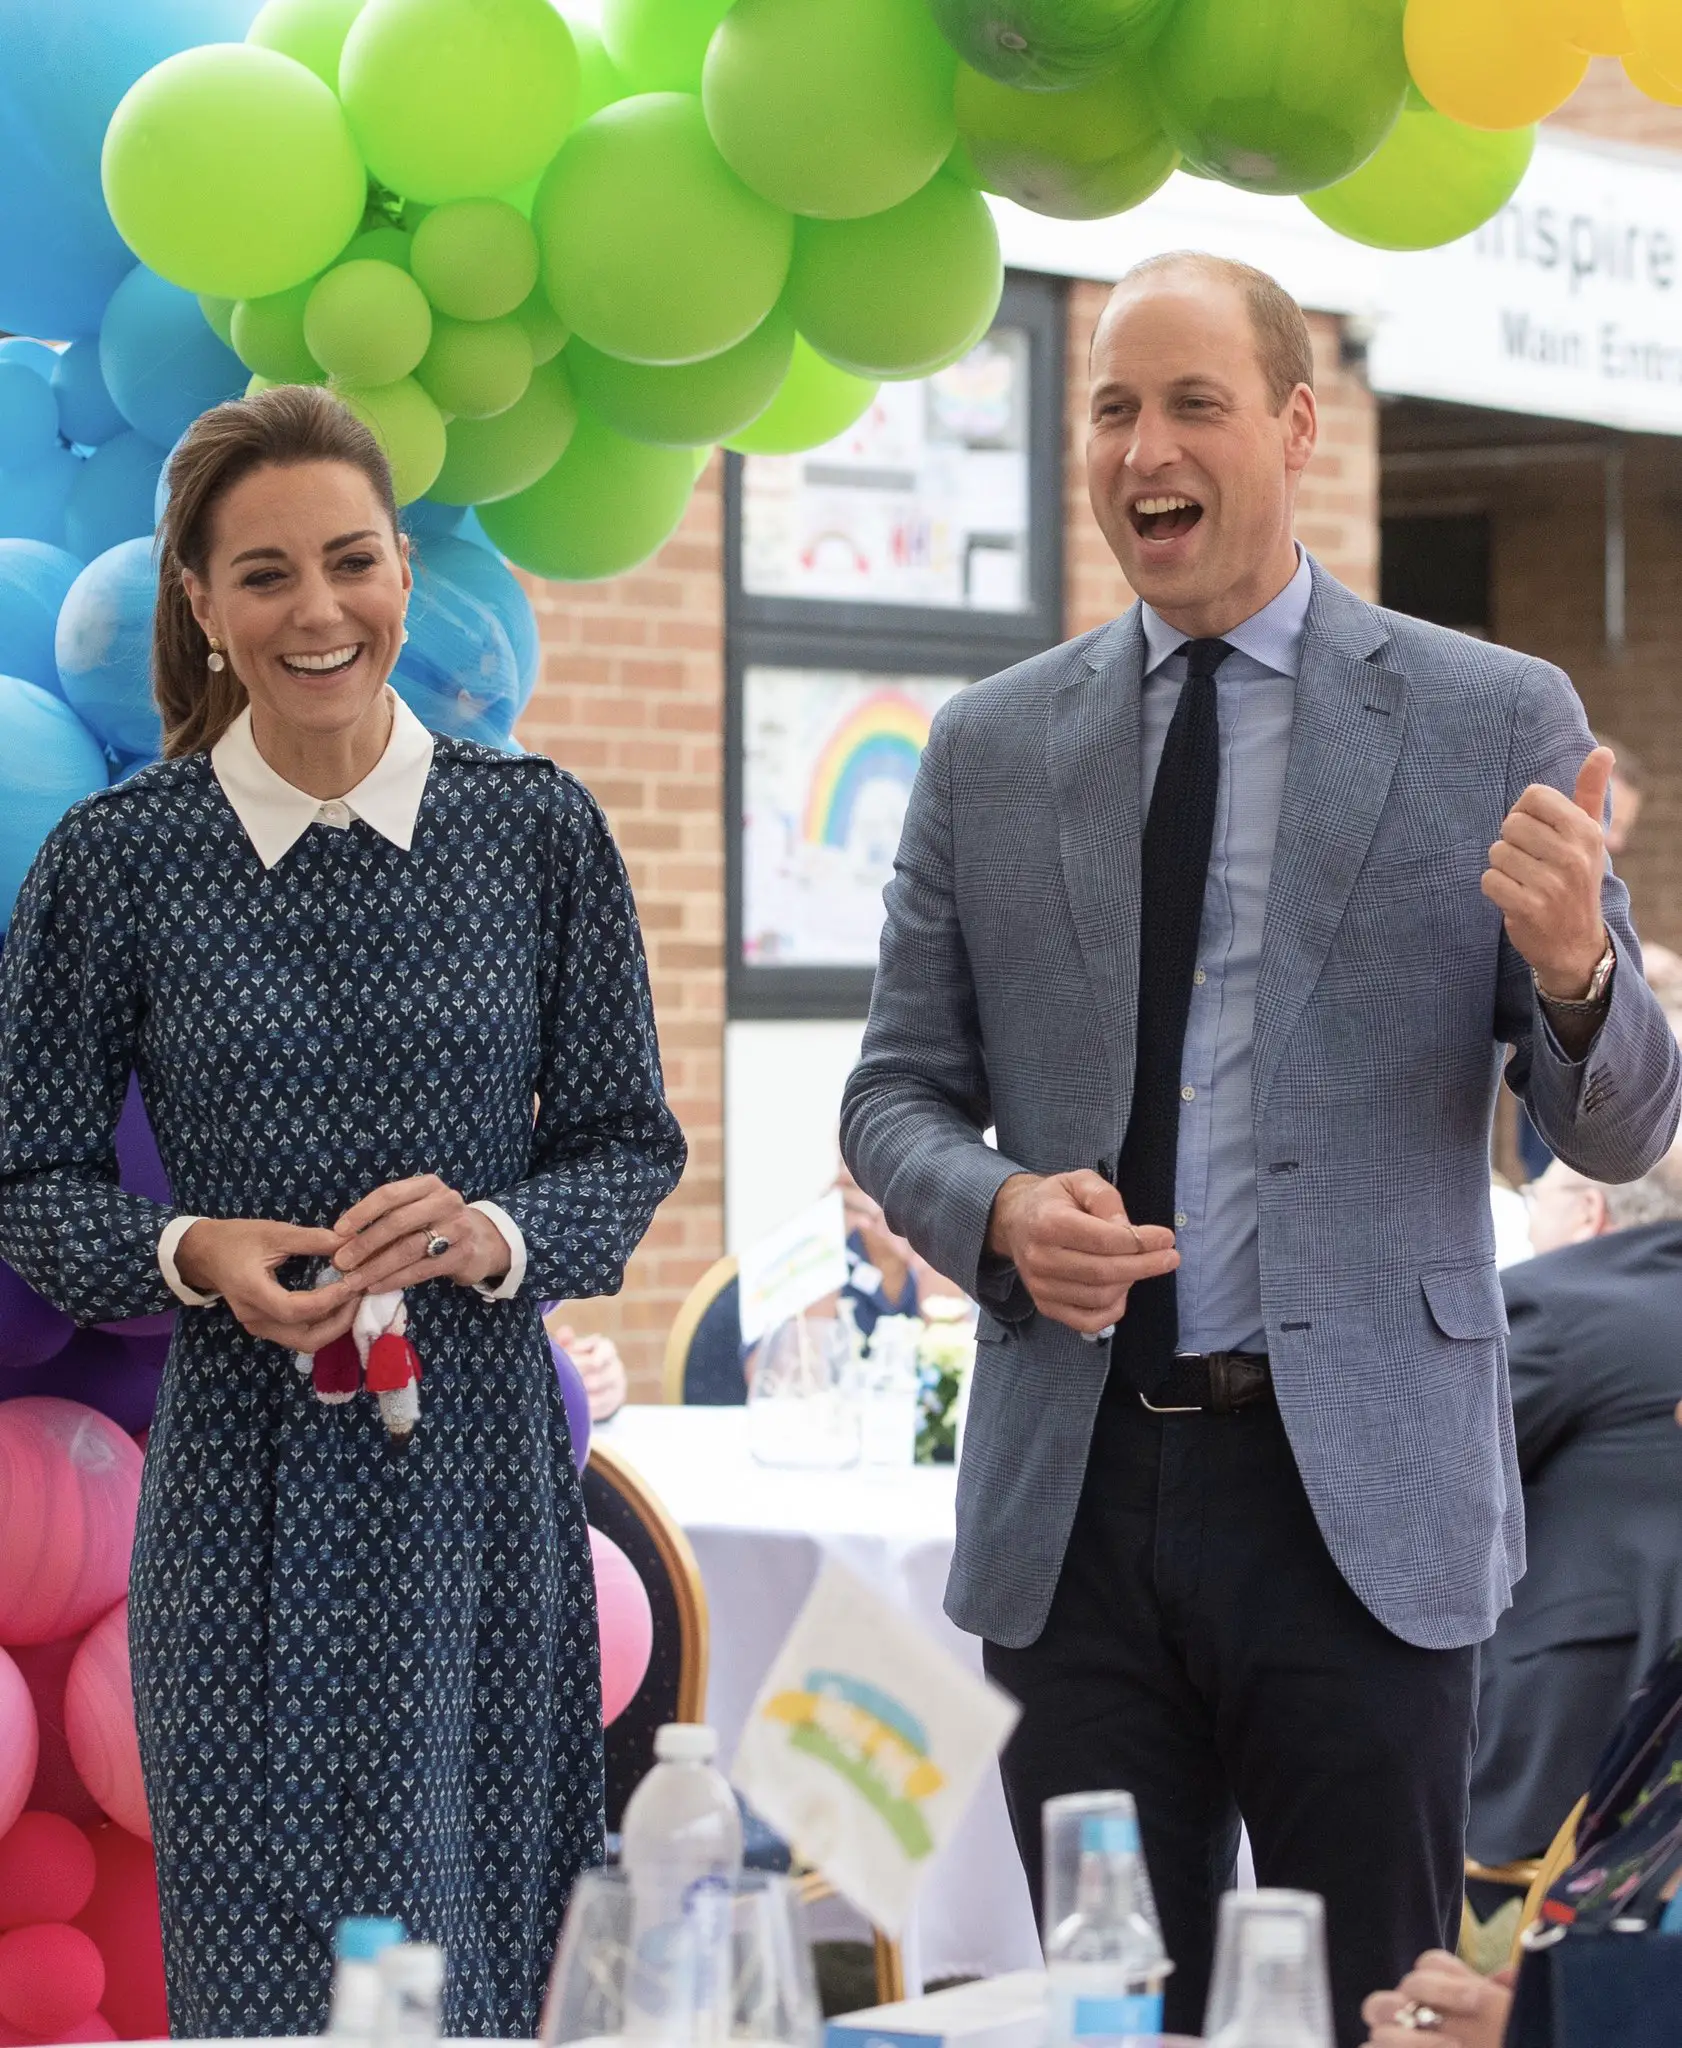 The Duke and Duchess of cambridge visited Queen Elizabeth Hospital in King's Lynn